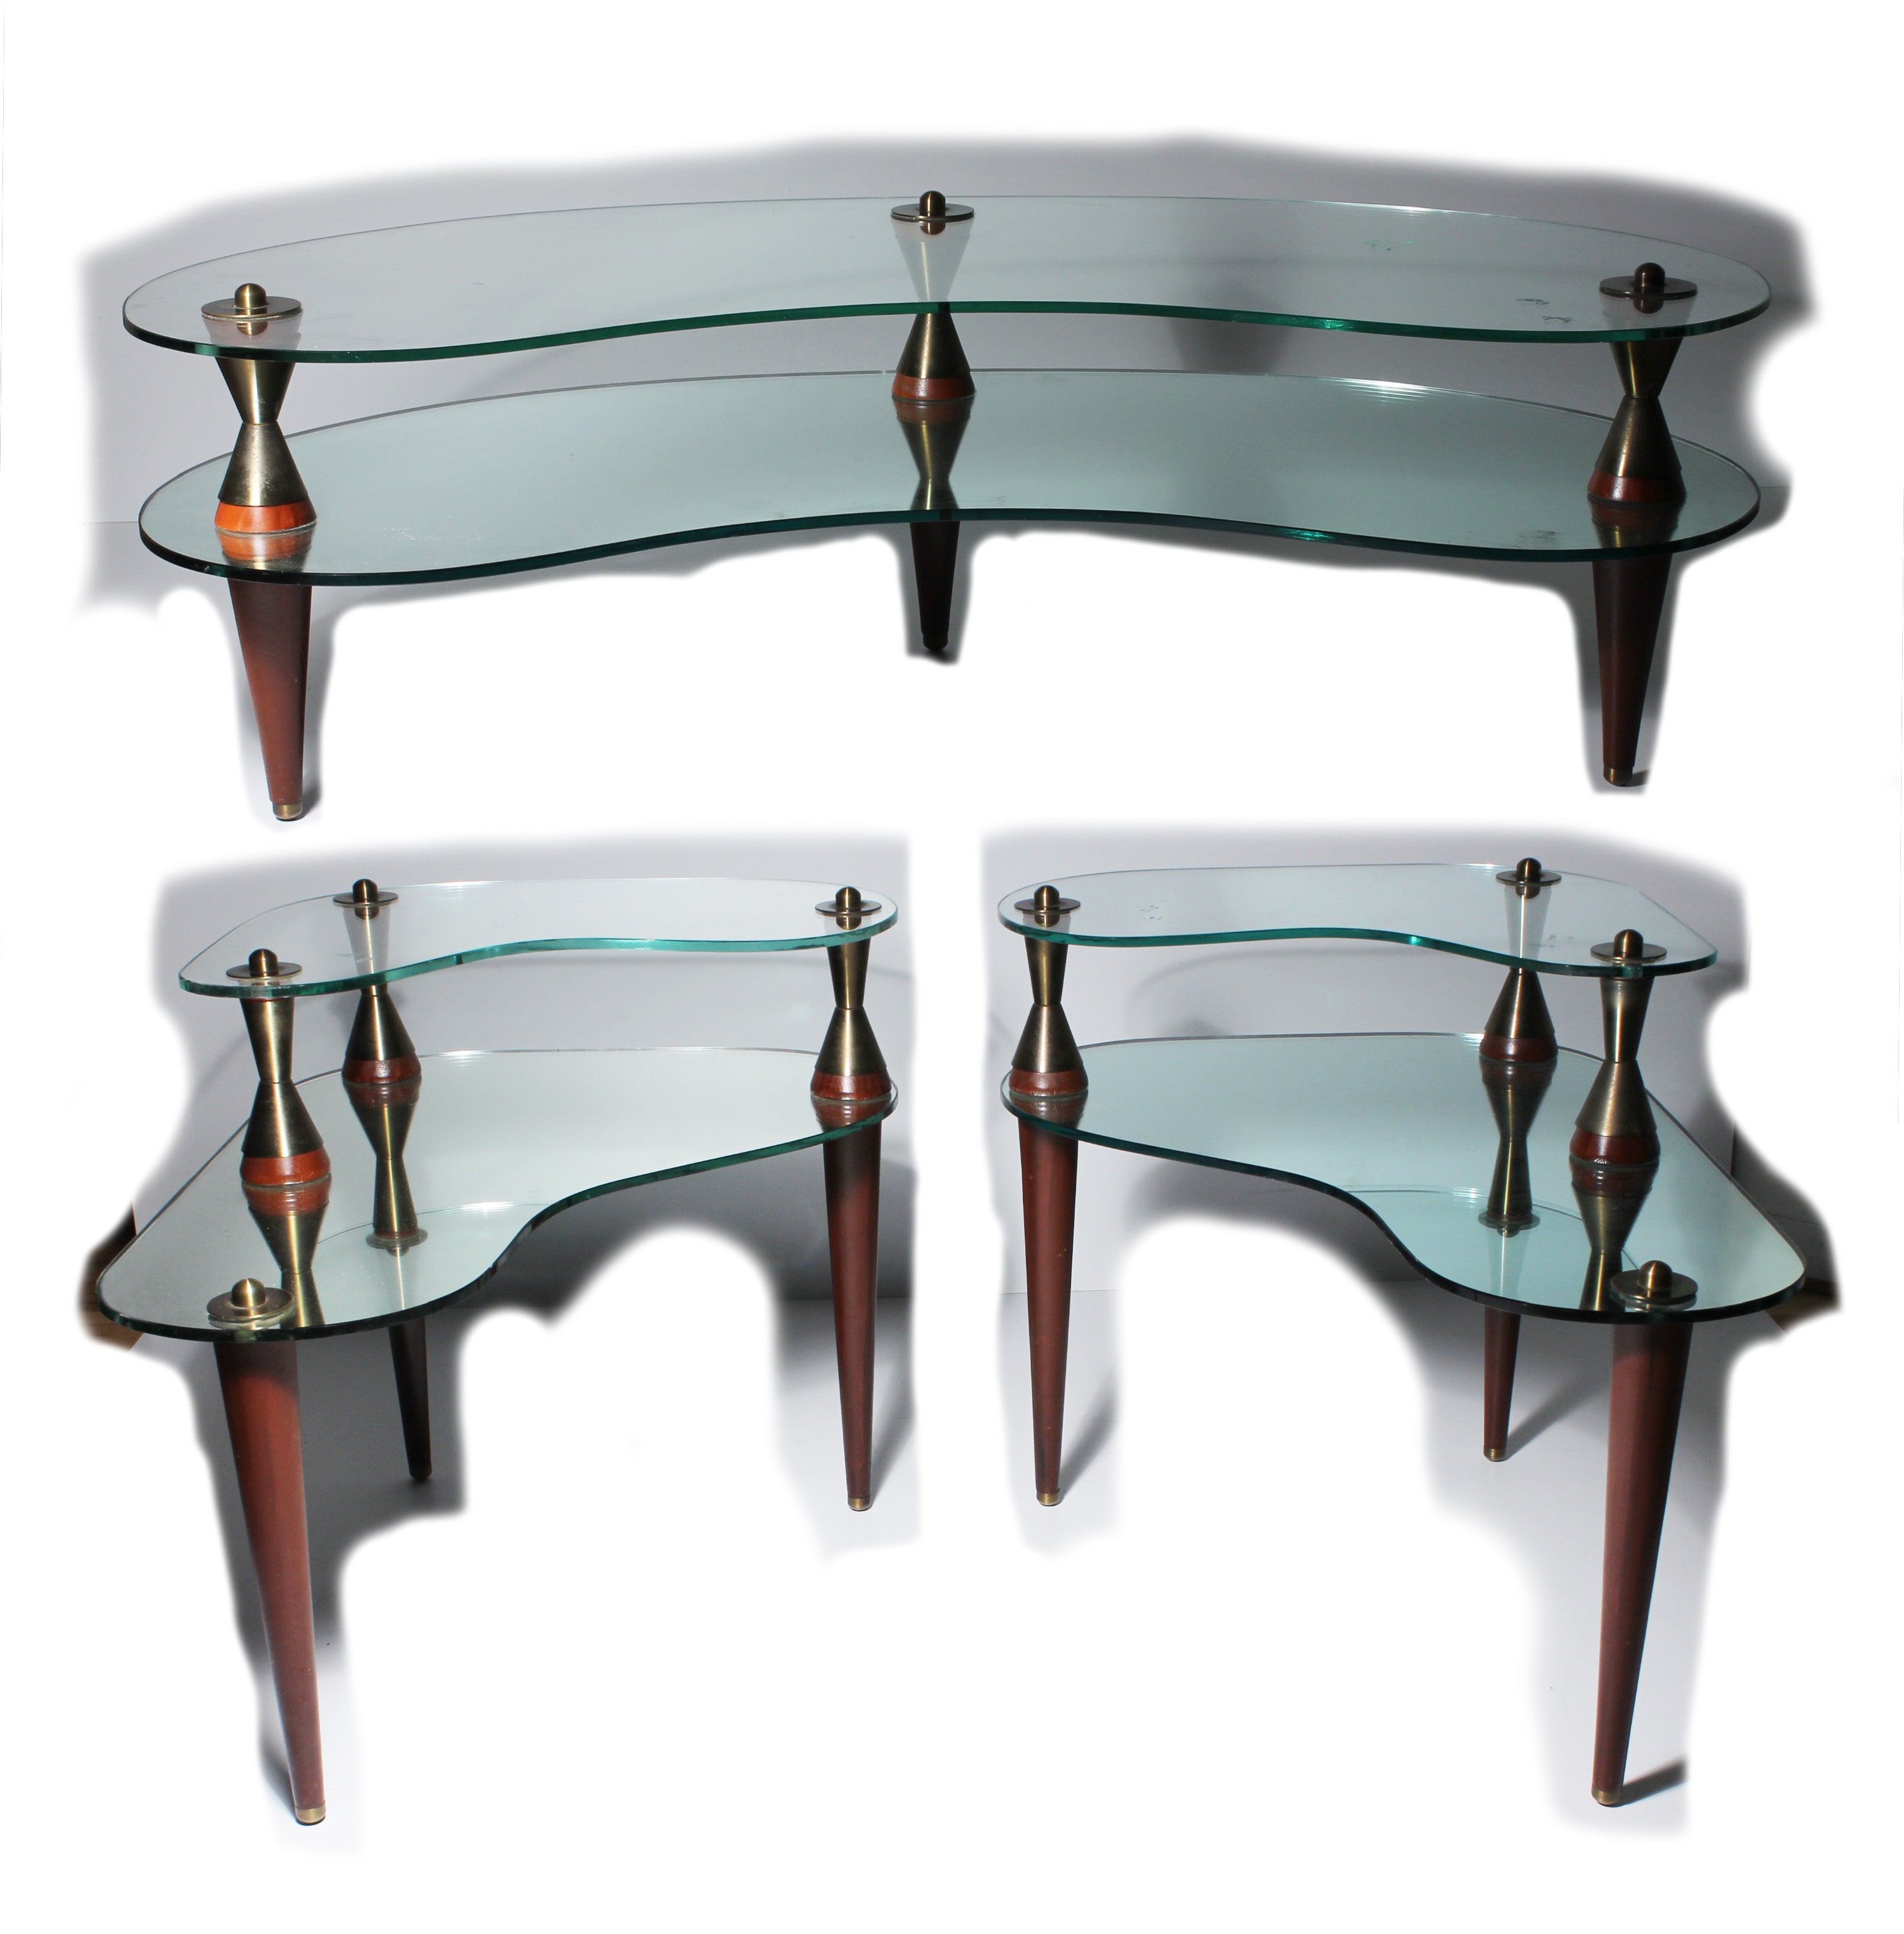 Italian Atomic Kidney shaped Mirror & Glass Coffee / End Tables Suite